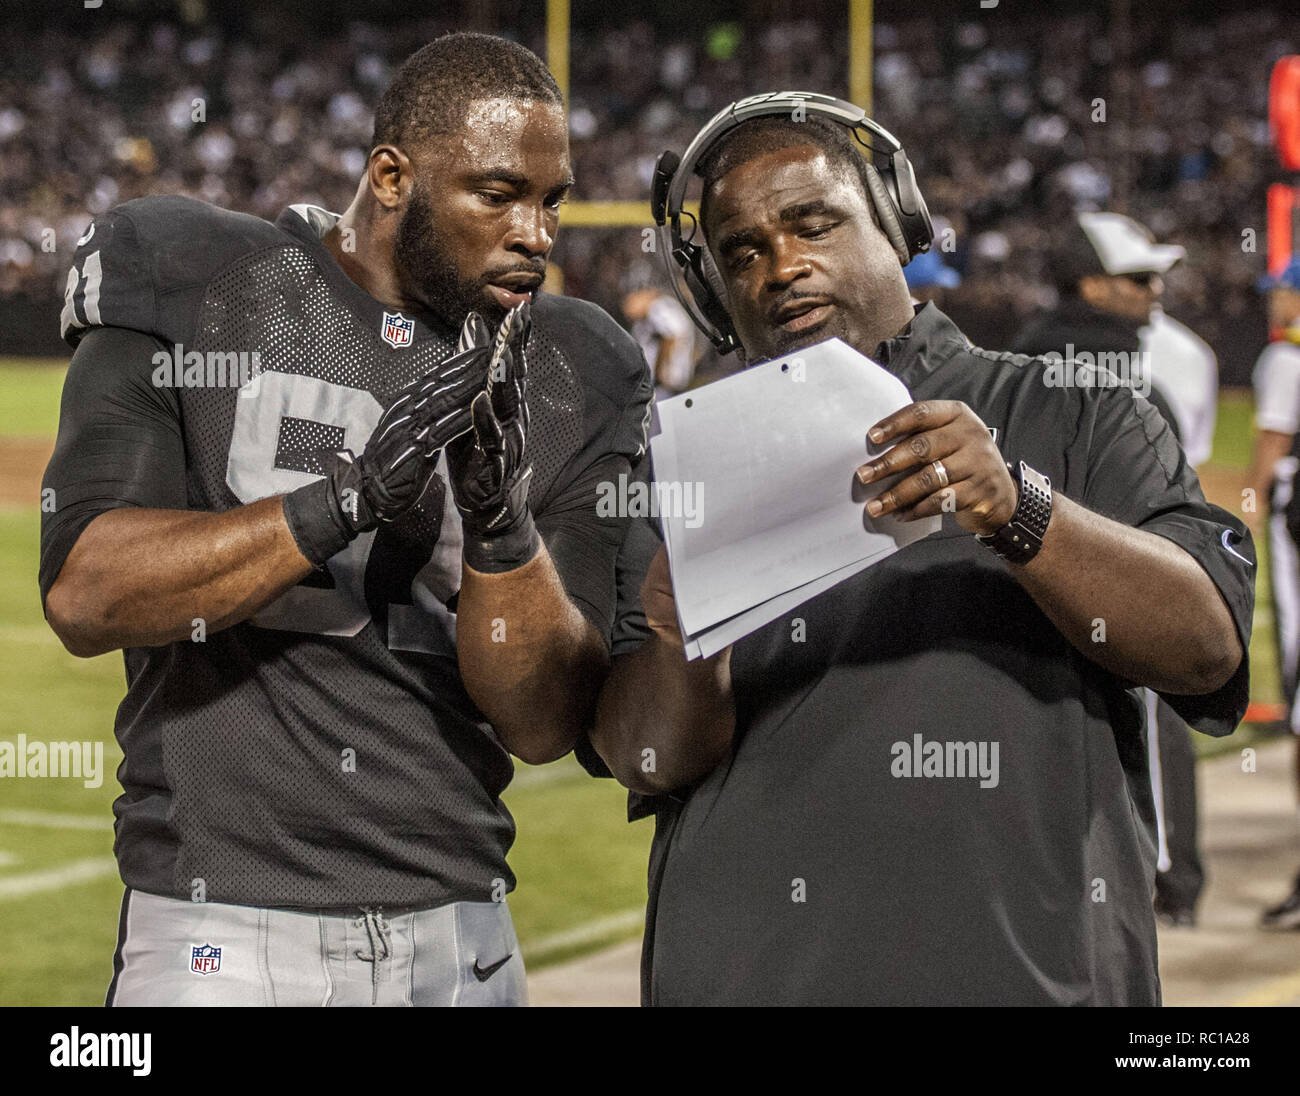 Oakland, California, USA. 15th Aug, 2014. August 15, 2014 Oakland Raiders defensive end Justin Tuck (91) works with defensive line coach Terrell Williams on Friday, August 15, 2014, at O.co Coliseum in Oakland, California. The Raiders defeated the Lions 27-26 in a preseason game. Credit: Al Golub/ZUMA Wire/Alamy Live News Stock Photo